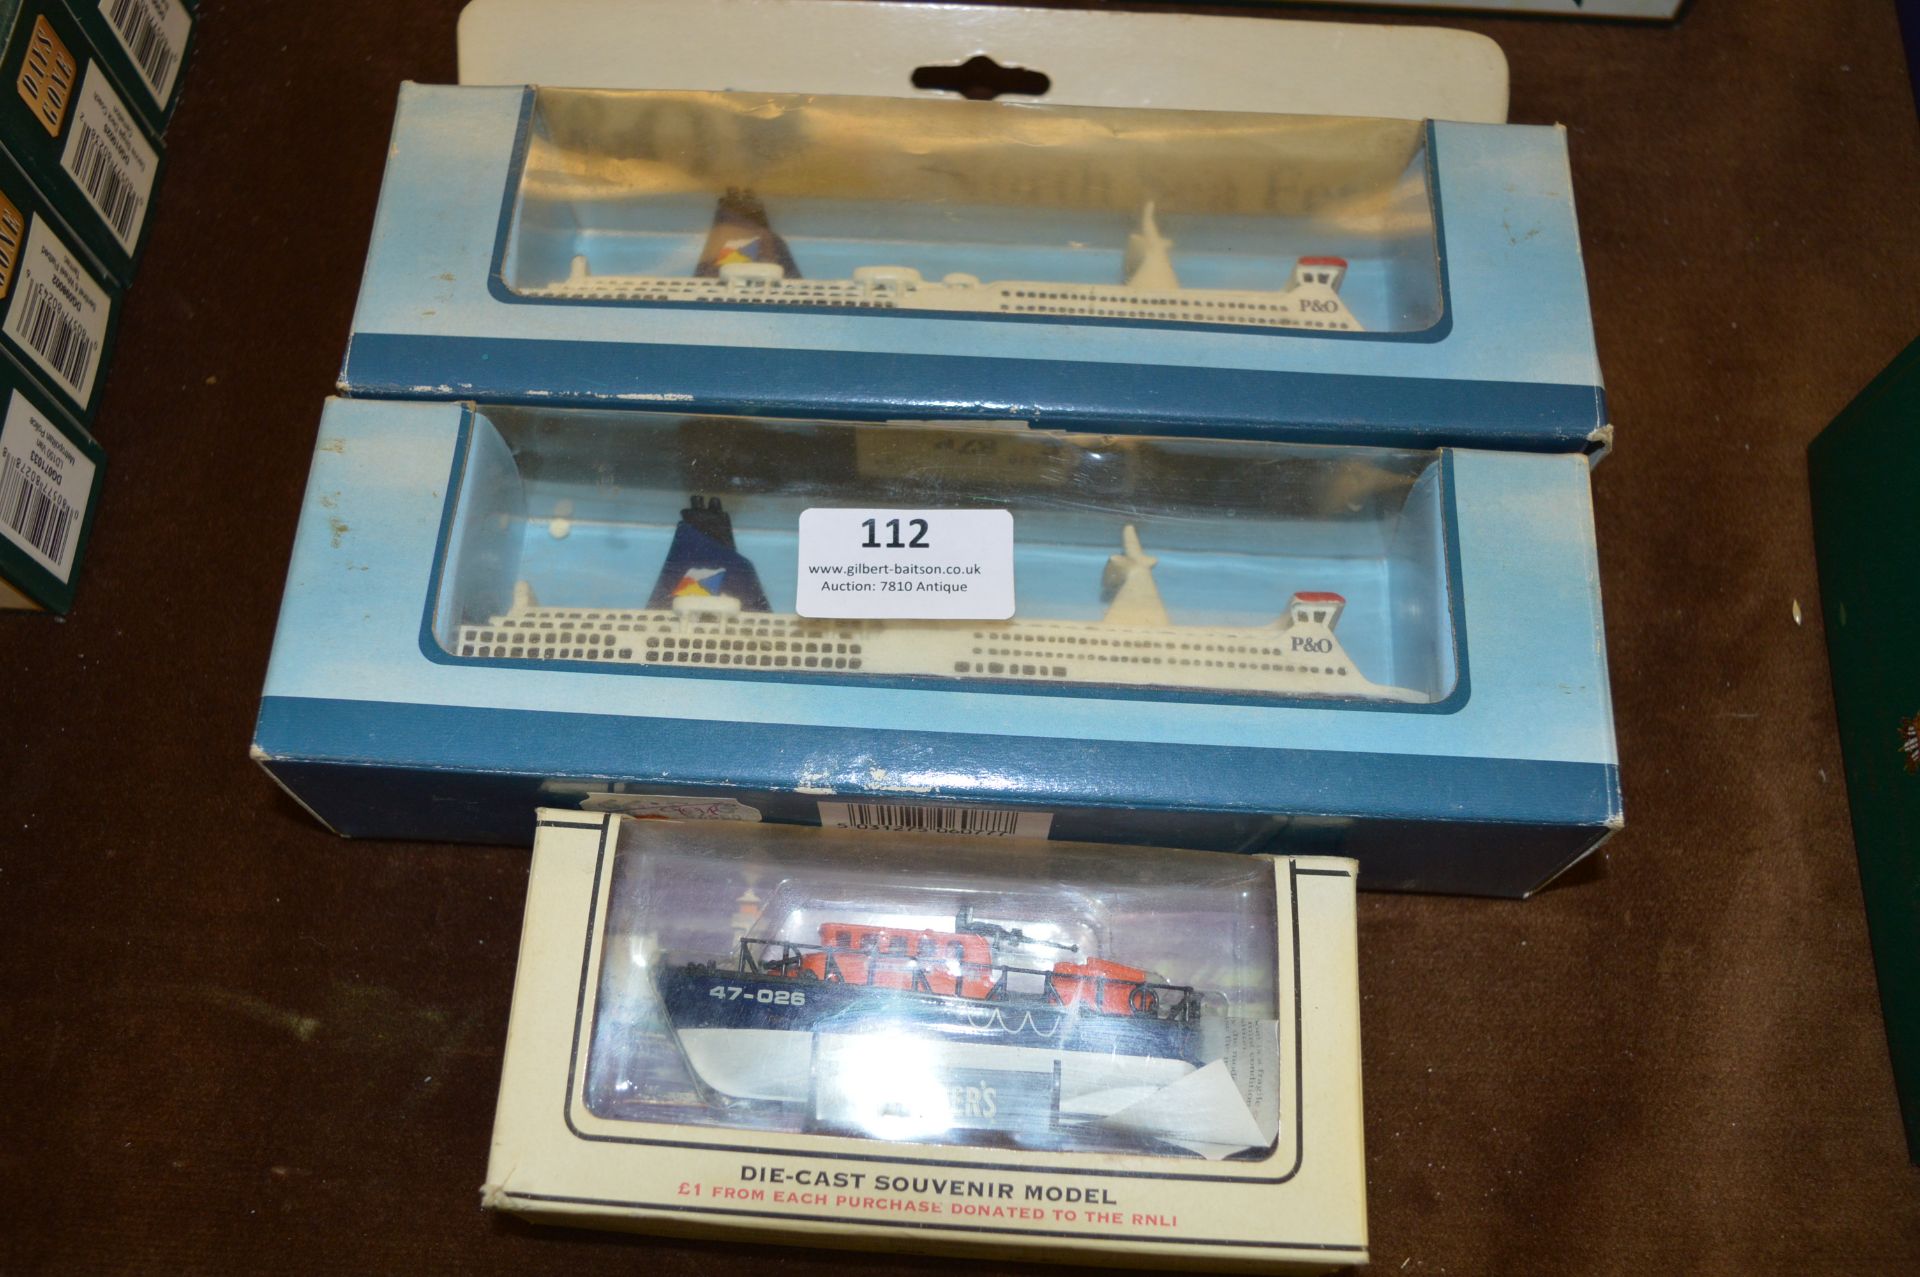 Diecast P&O Ferries Models and a Lifeboat